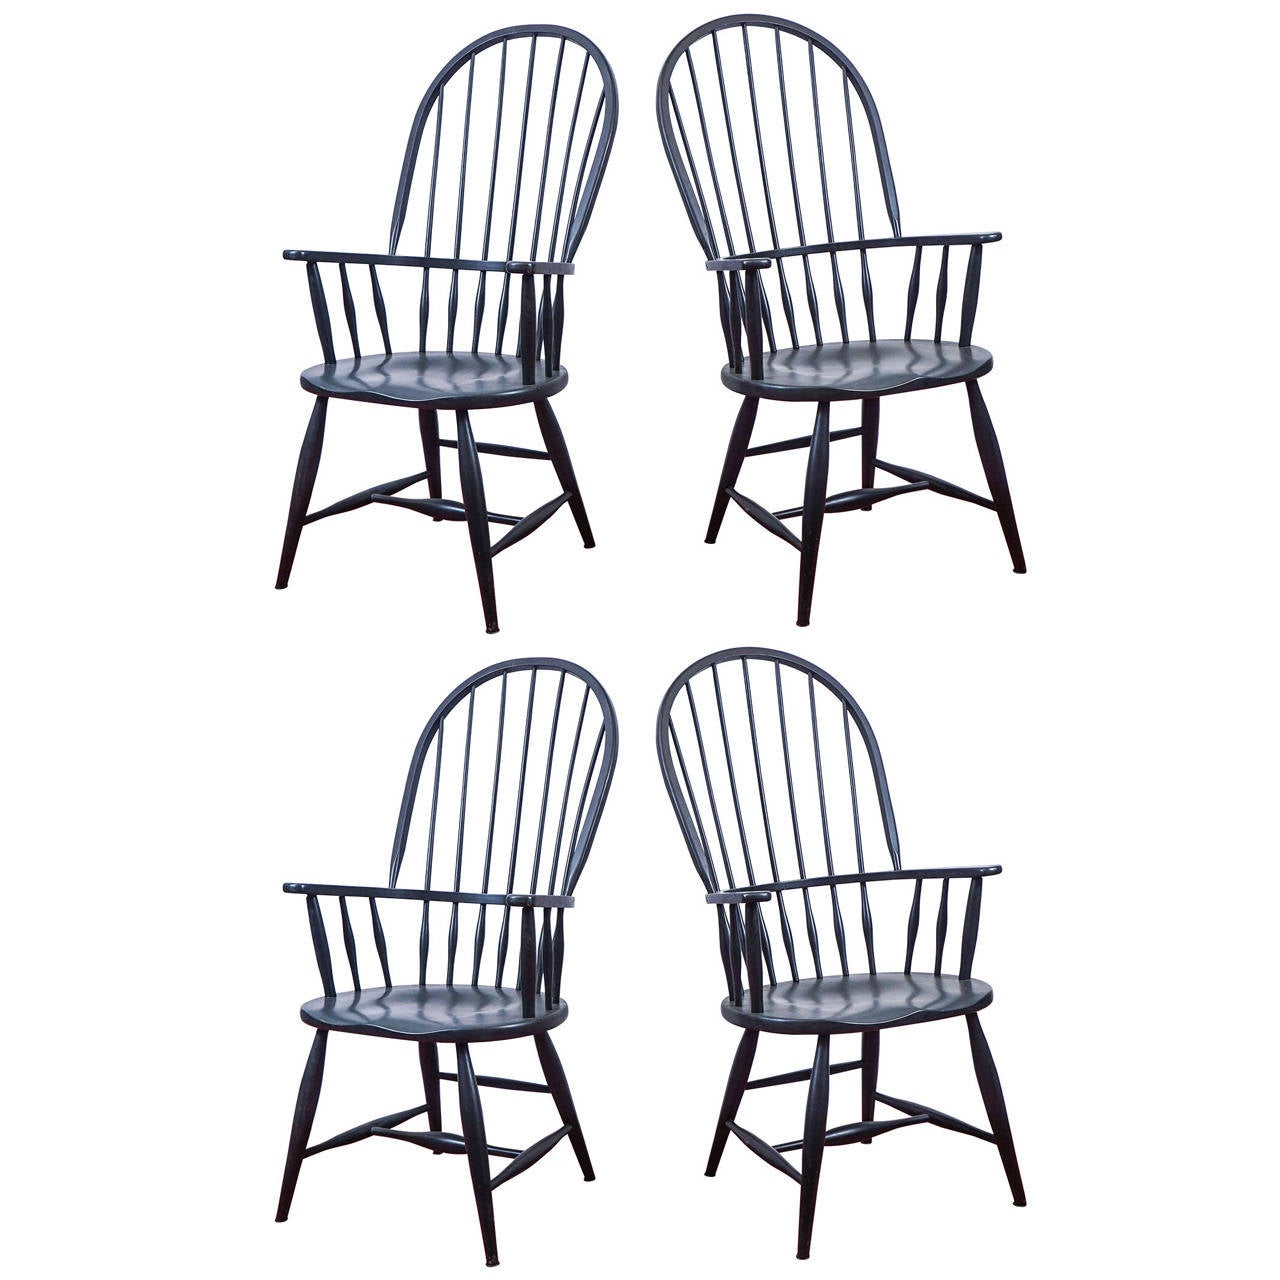 Set of four Windsor armchairs, early 20th century